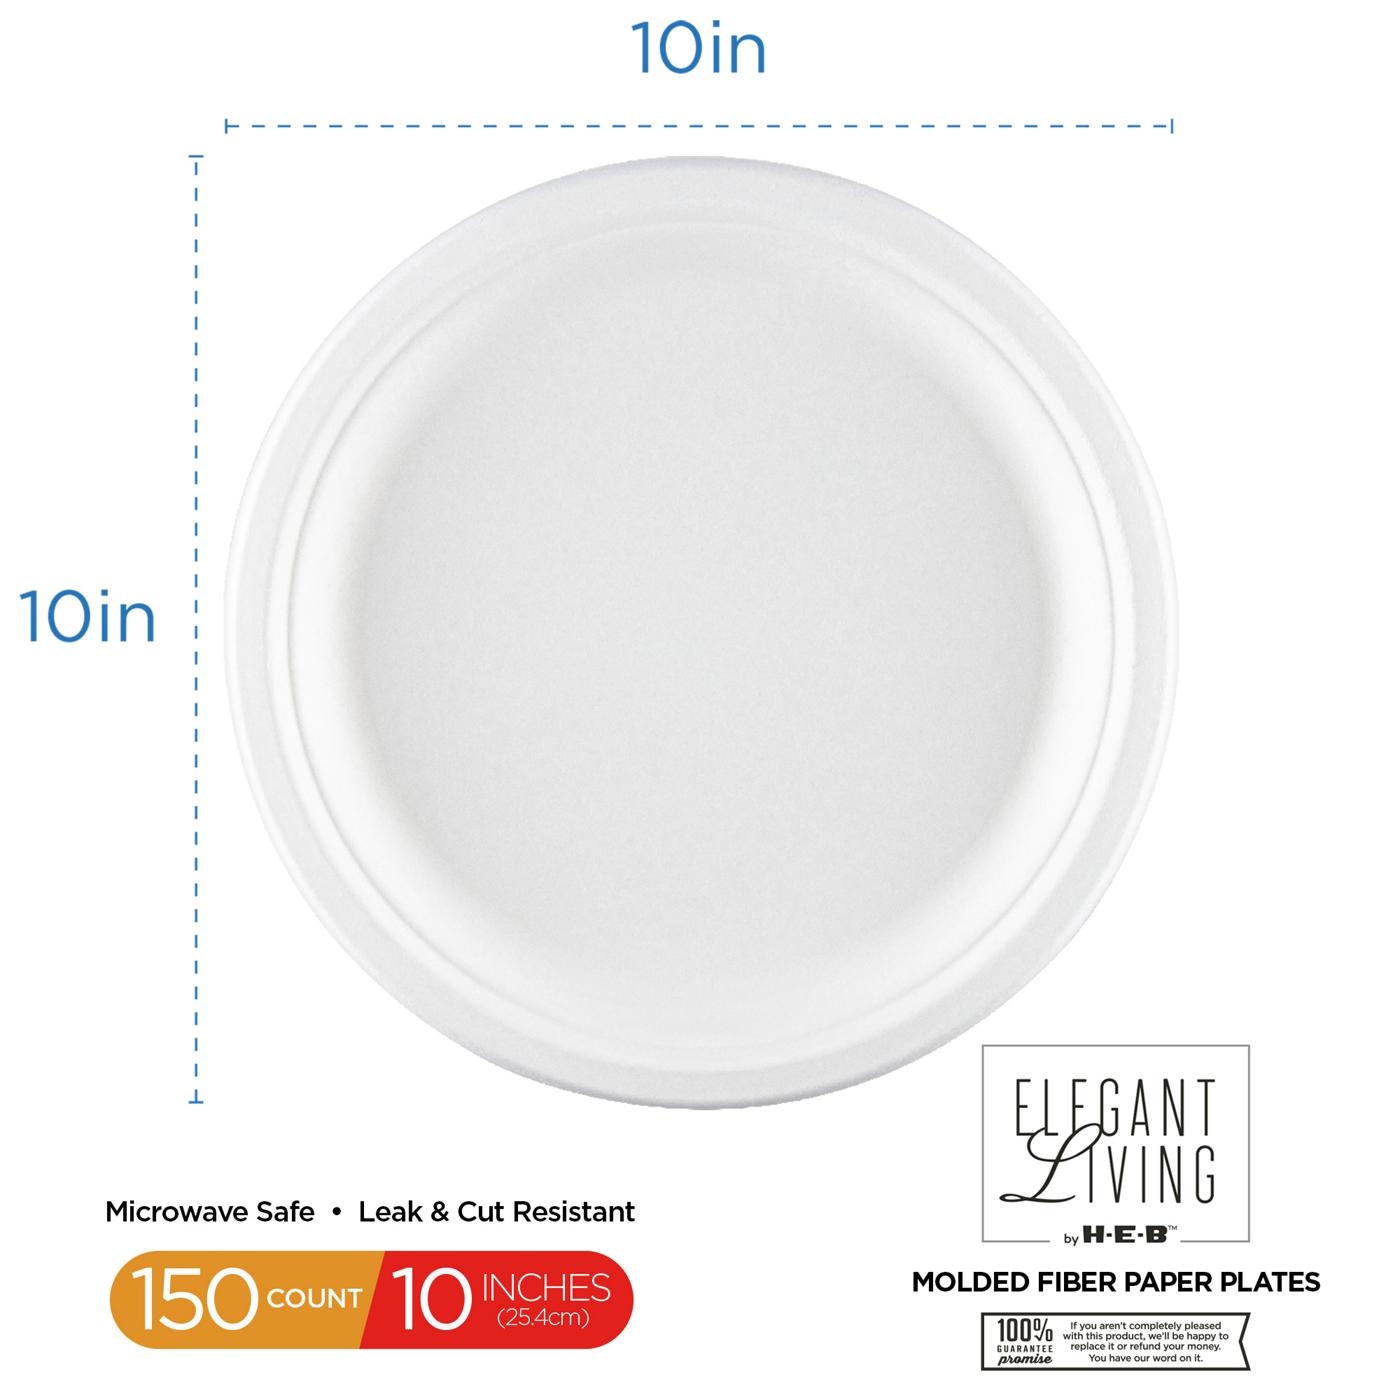 Elegant Living by H-E-B 10" Round Paper Plates - Value Pack; image 4 of 4